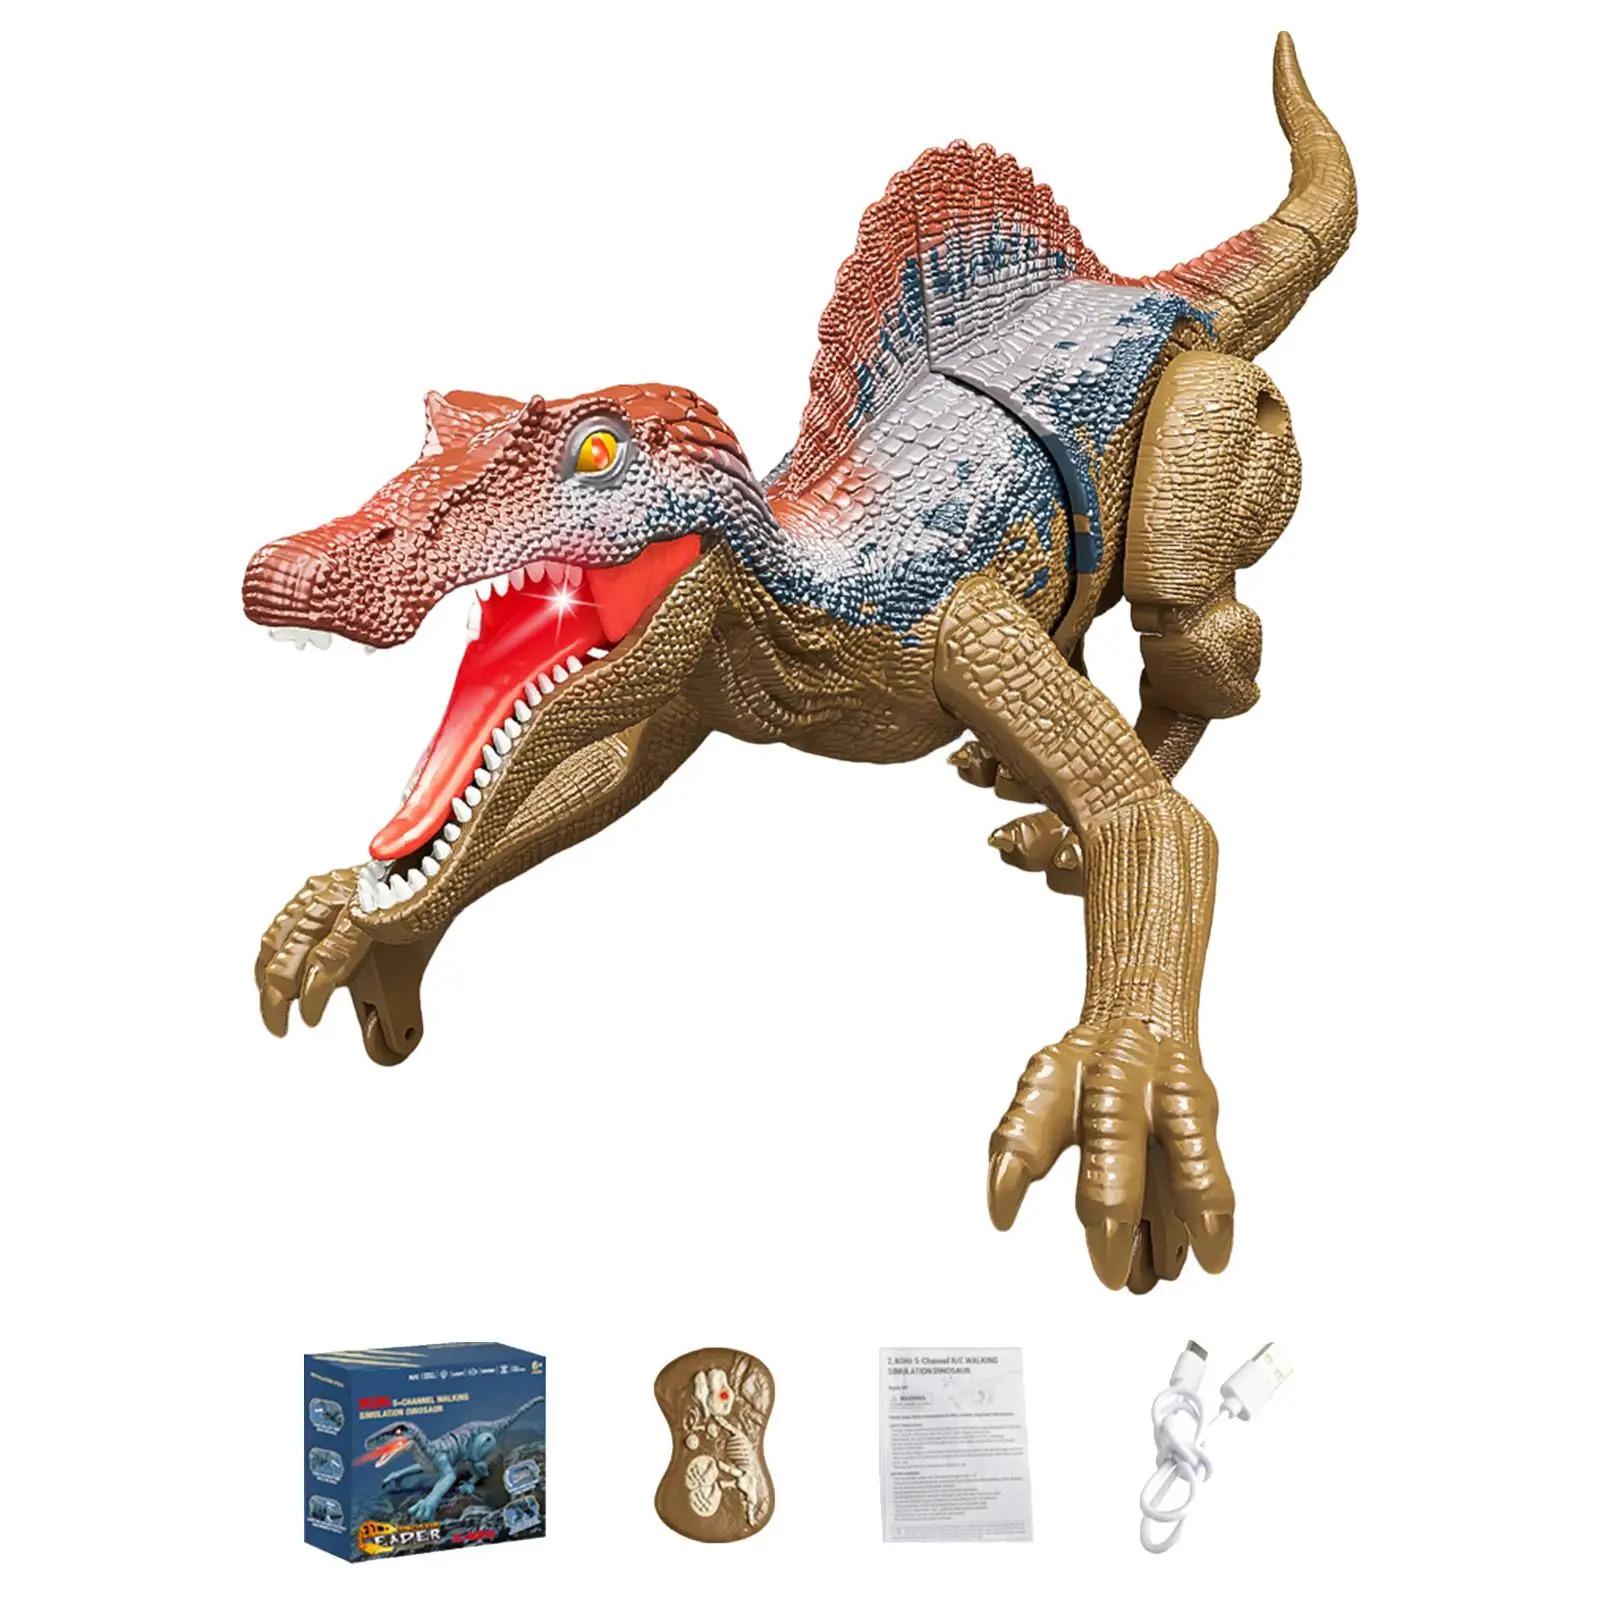 Robot Dinosaur Walking Dinosaur Toys with Sound and Light Remote Control Dinosaur Toys for Boys Children Toddlers Birthday Gifts